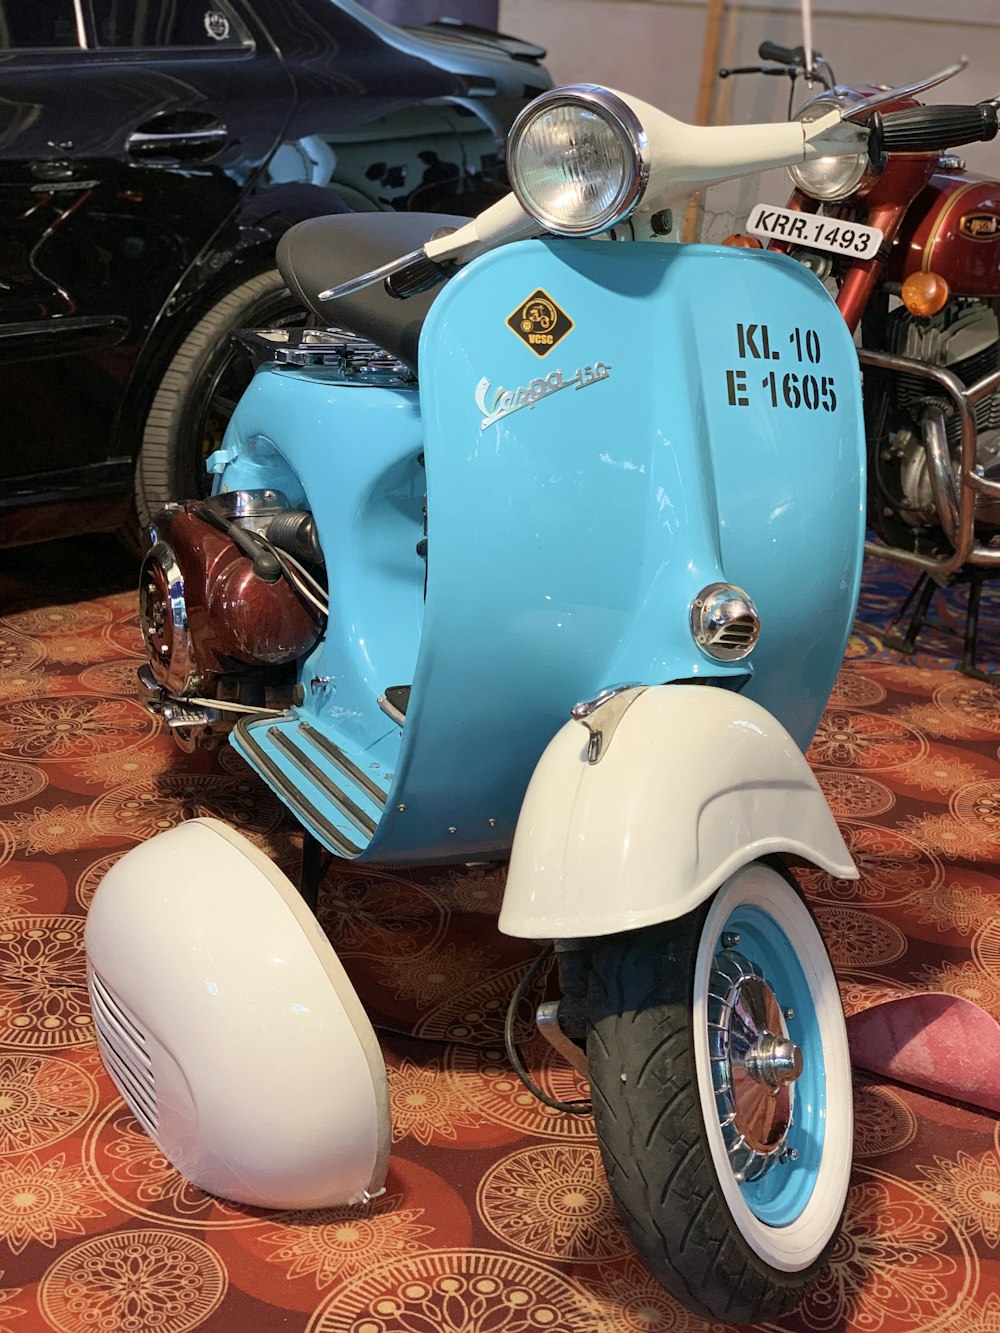 a blue and white motor scooter sitting on top of a carpet